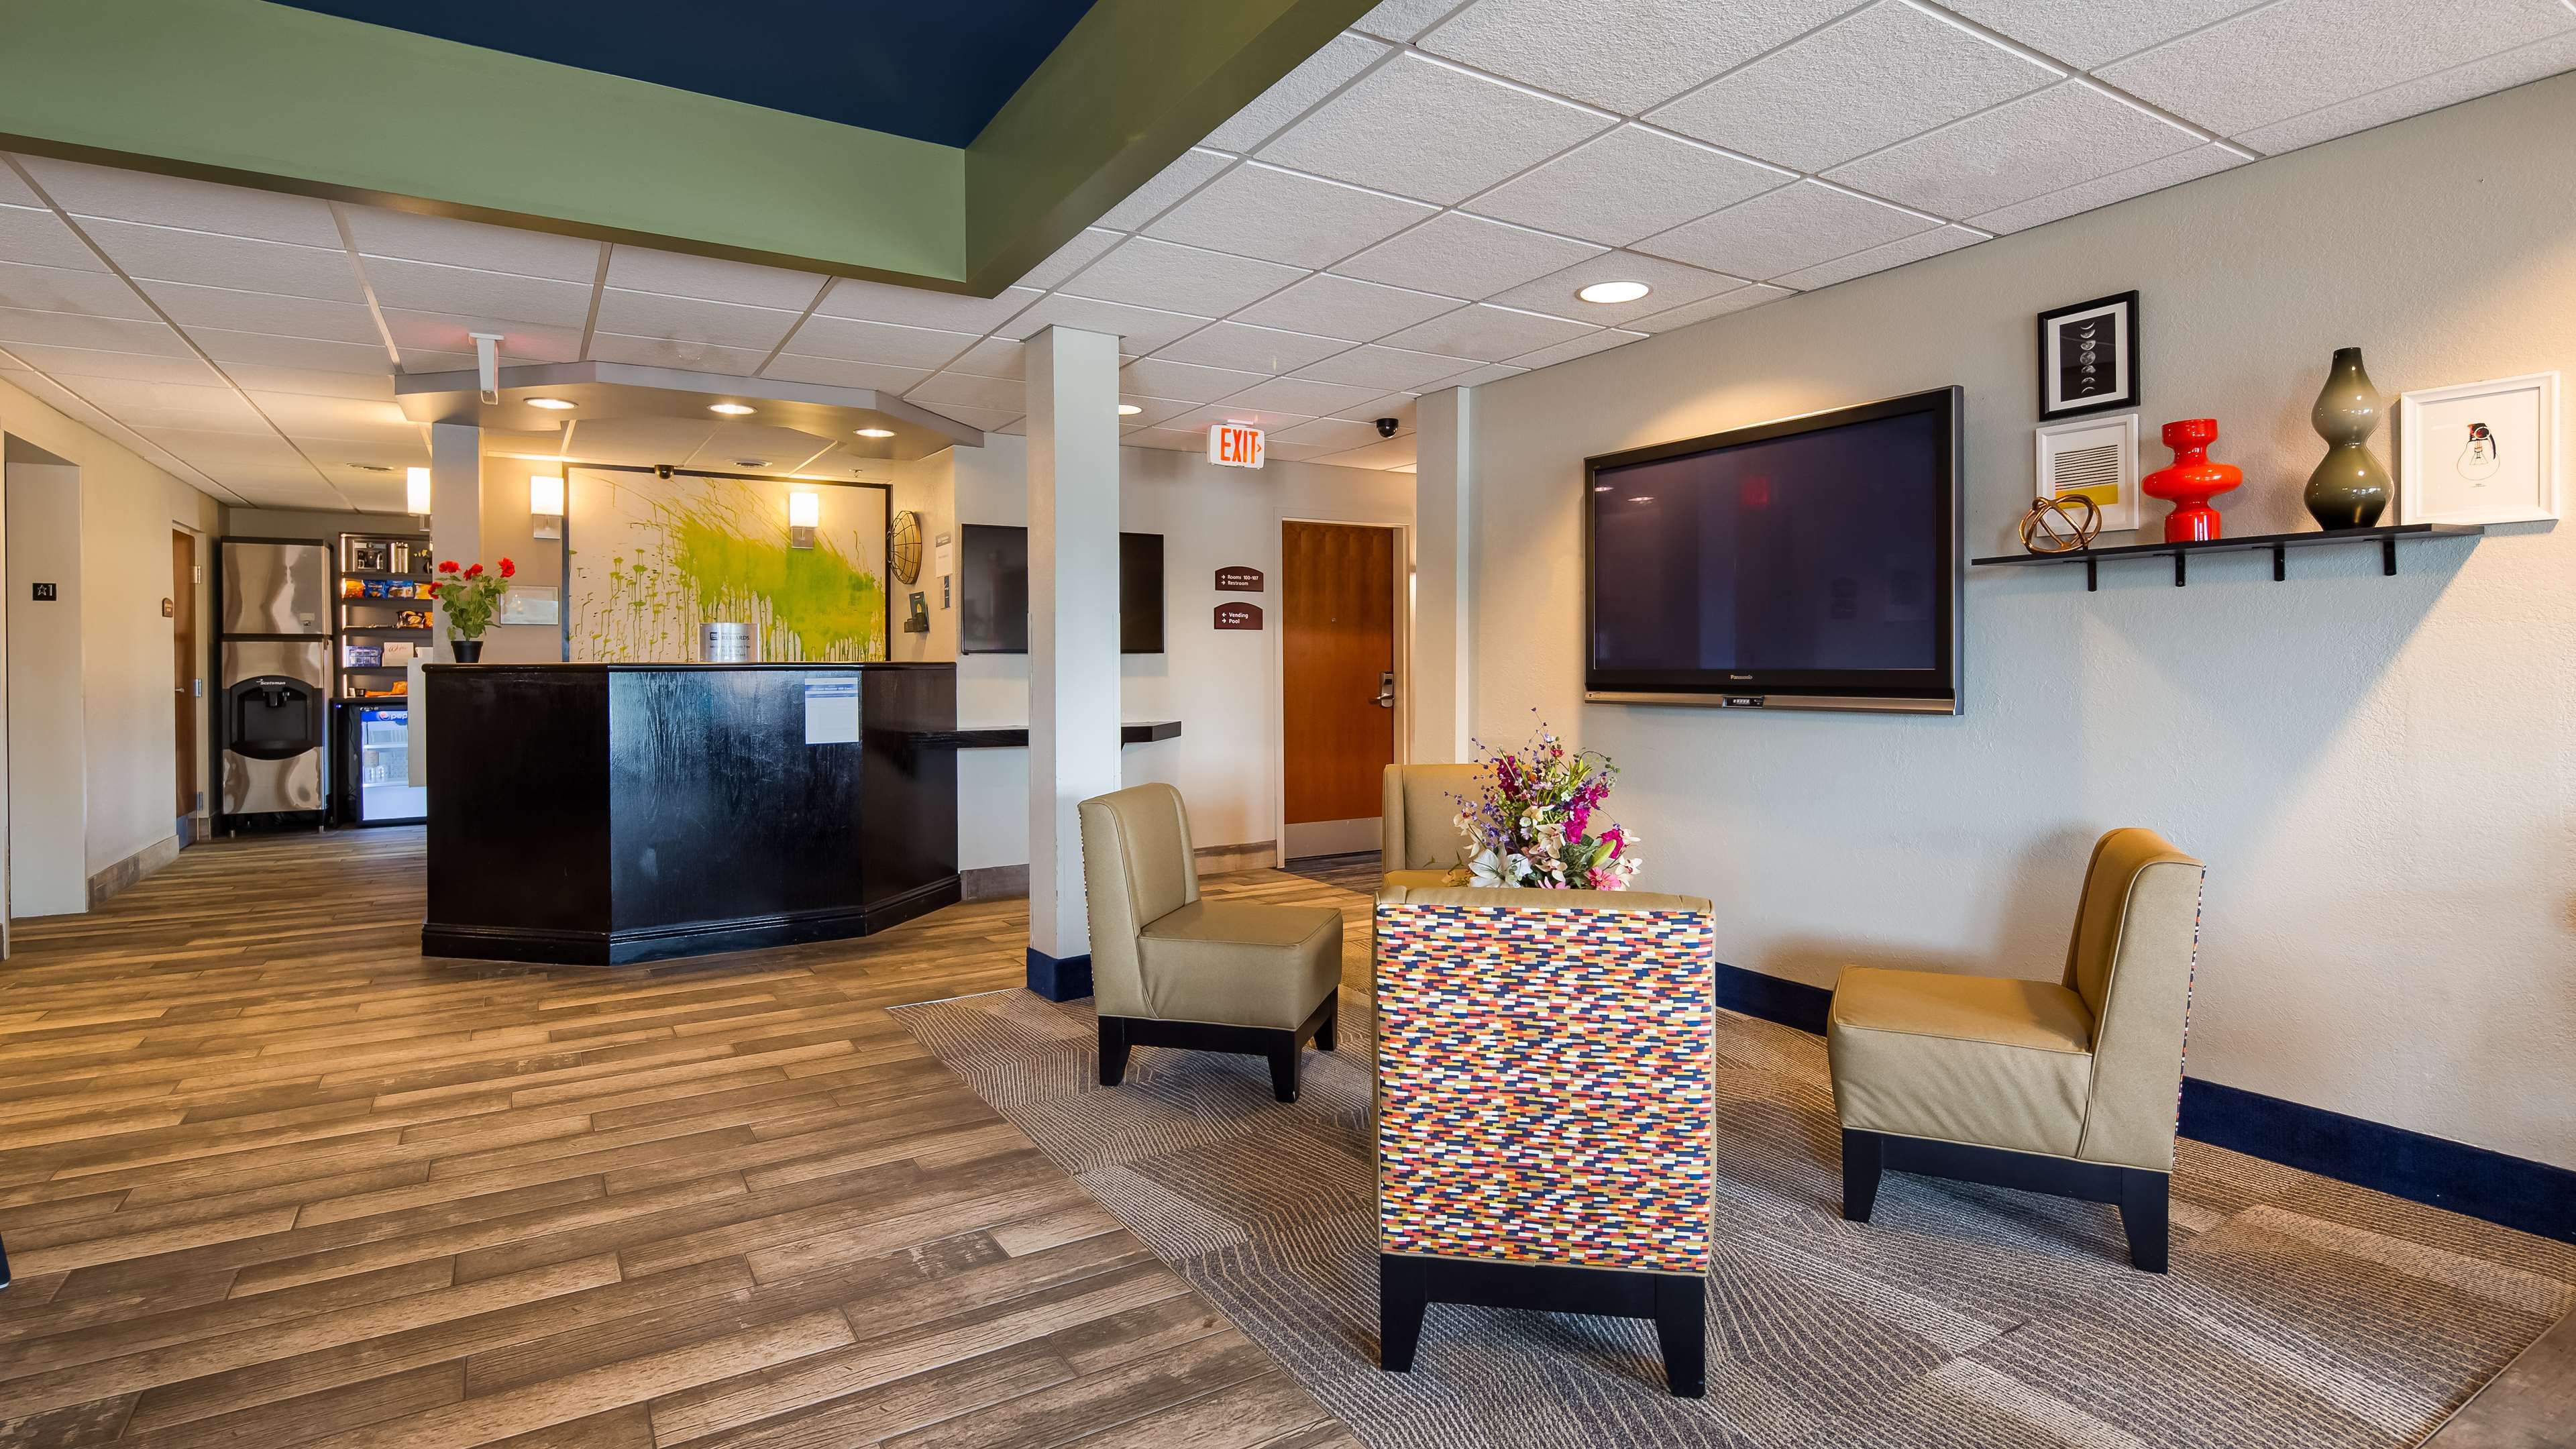 Our lobby offers seating and television for your convenience